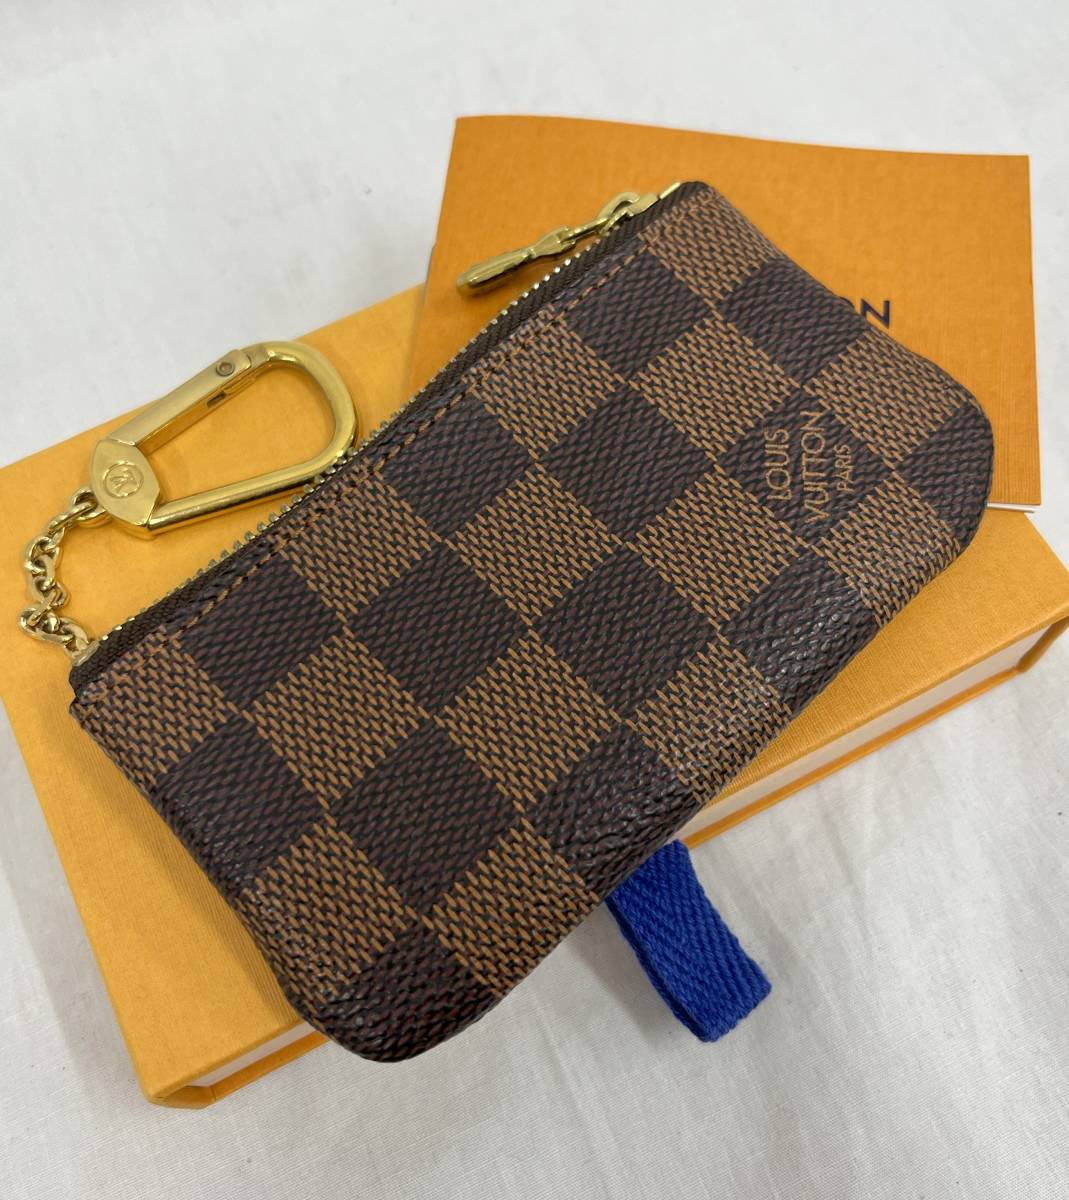 LOUIS VUITTON ルイヴィトン ダミエ N62658 ポシェット・クレ コインケース 美品